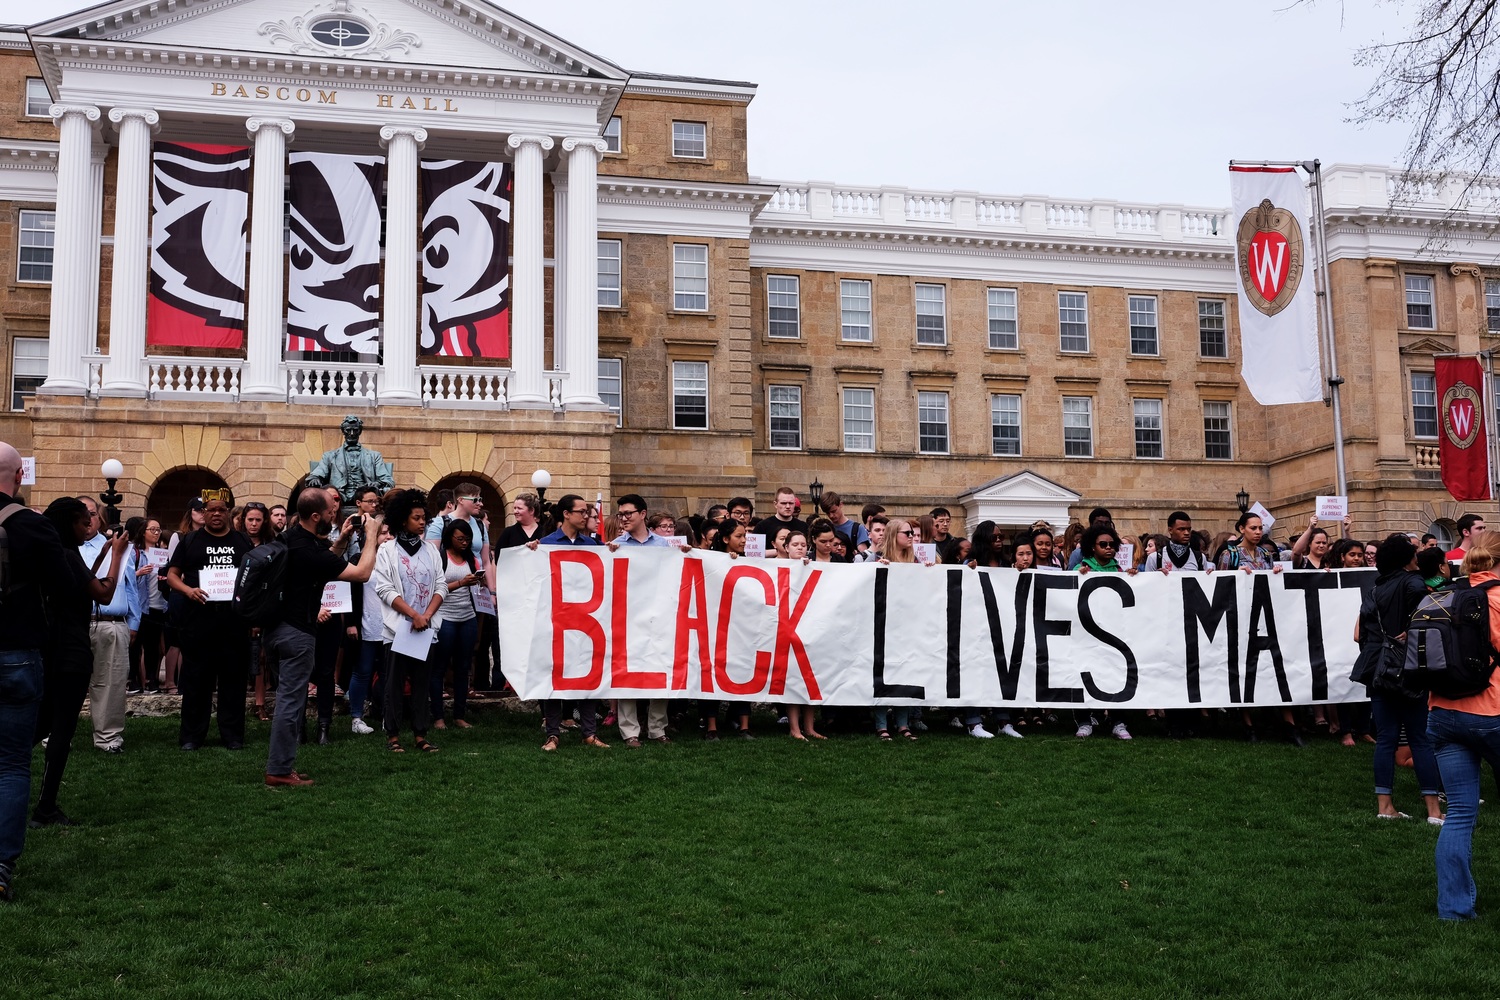 Gathering at Bascom Hall, seat of the University's administration.